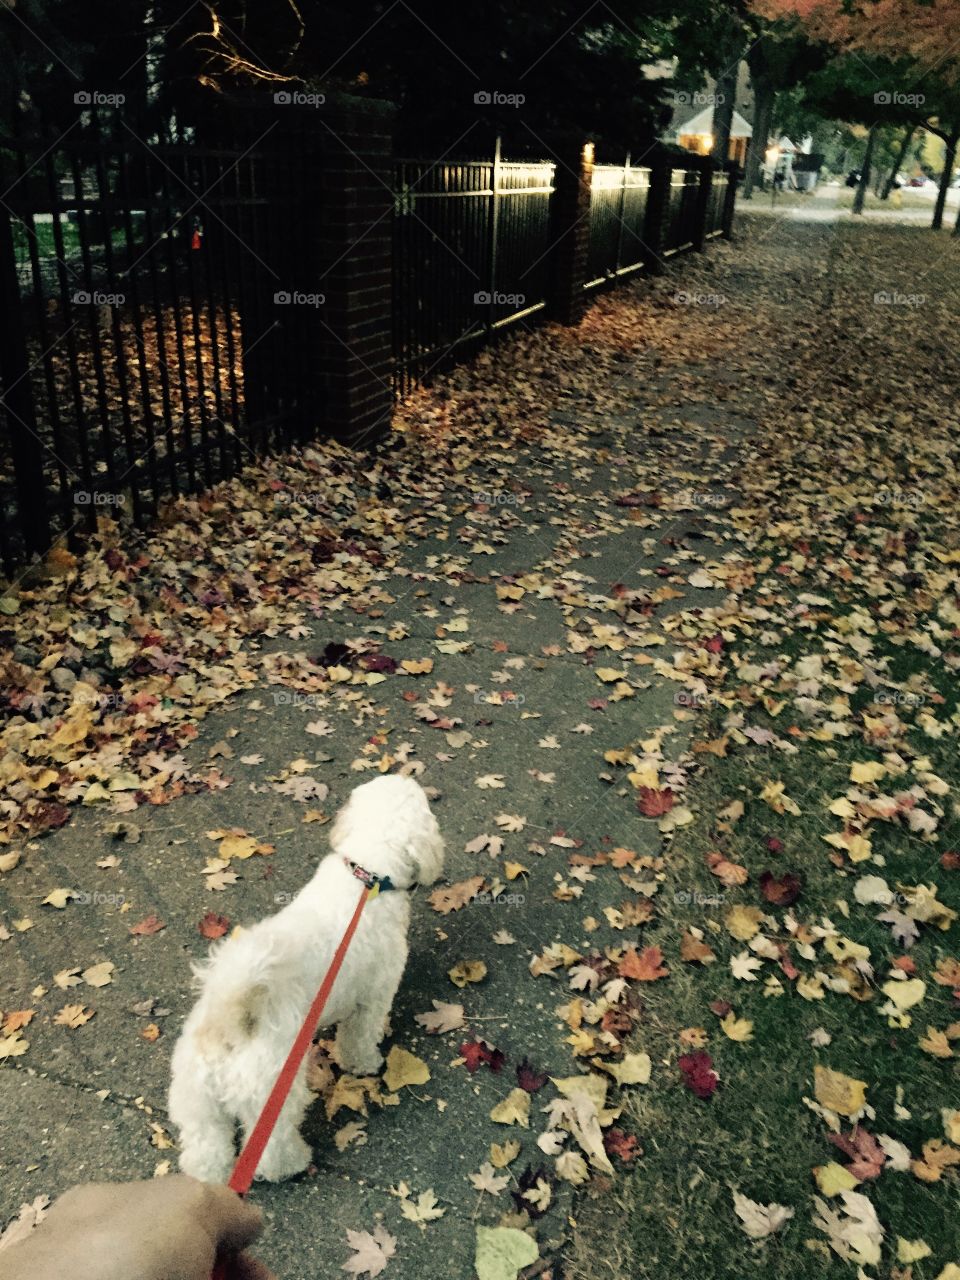 Evening dog walk. Fall leaves and active dog